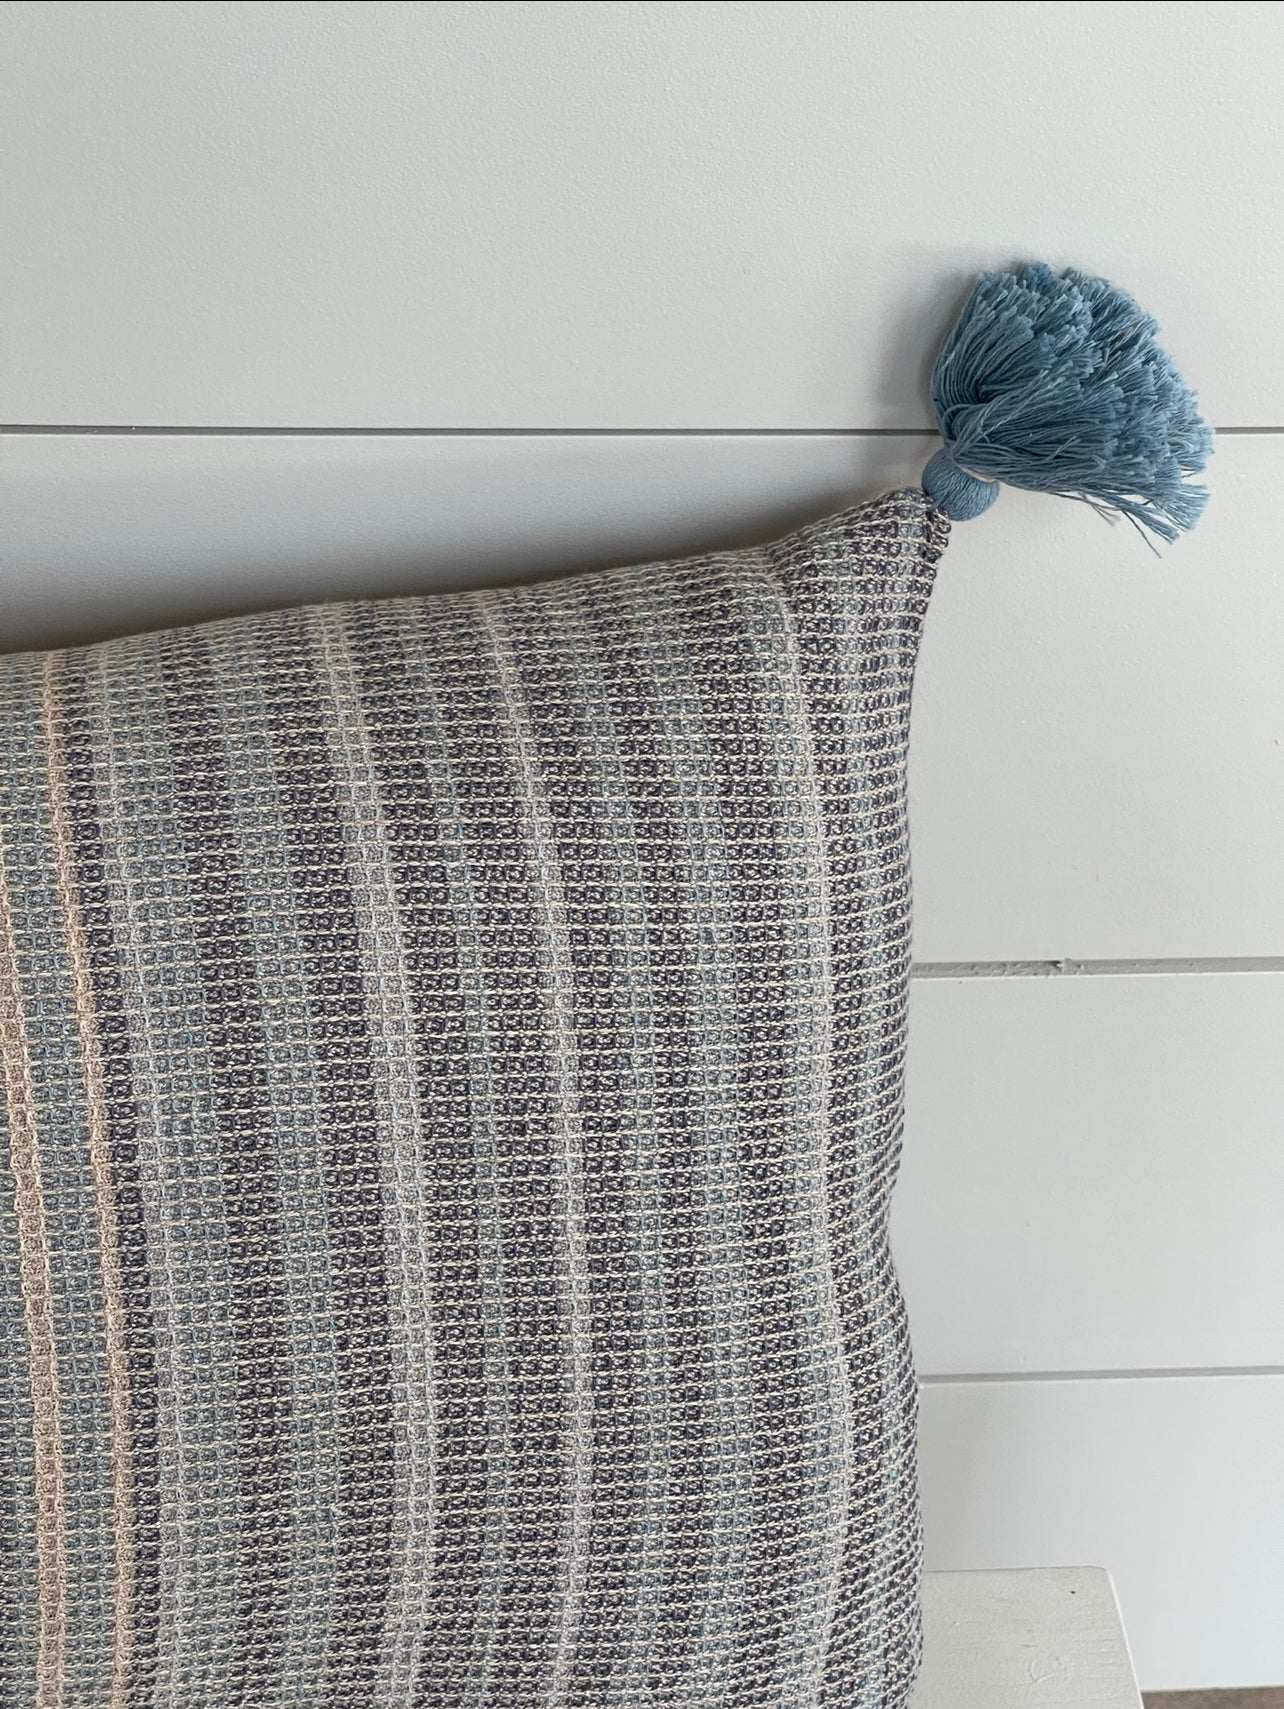 PALERMO CUSHION living-bedding onesky Beige & Lead blue Stripes Cushion Cover In Stock 